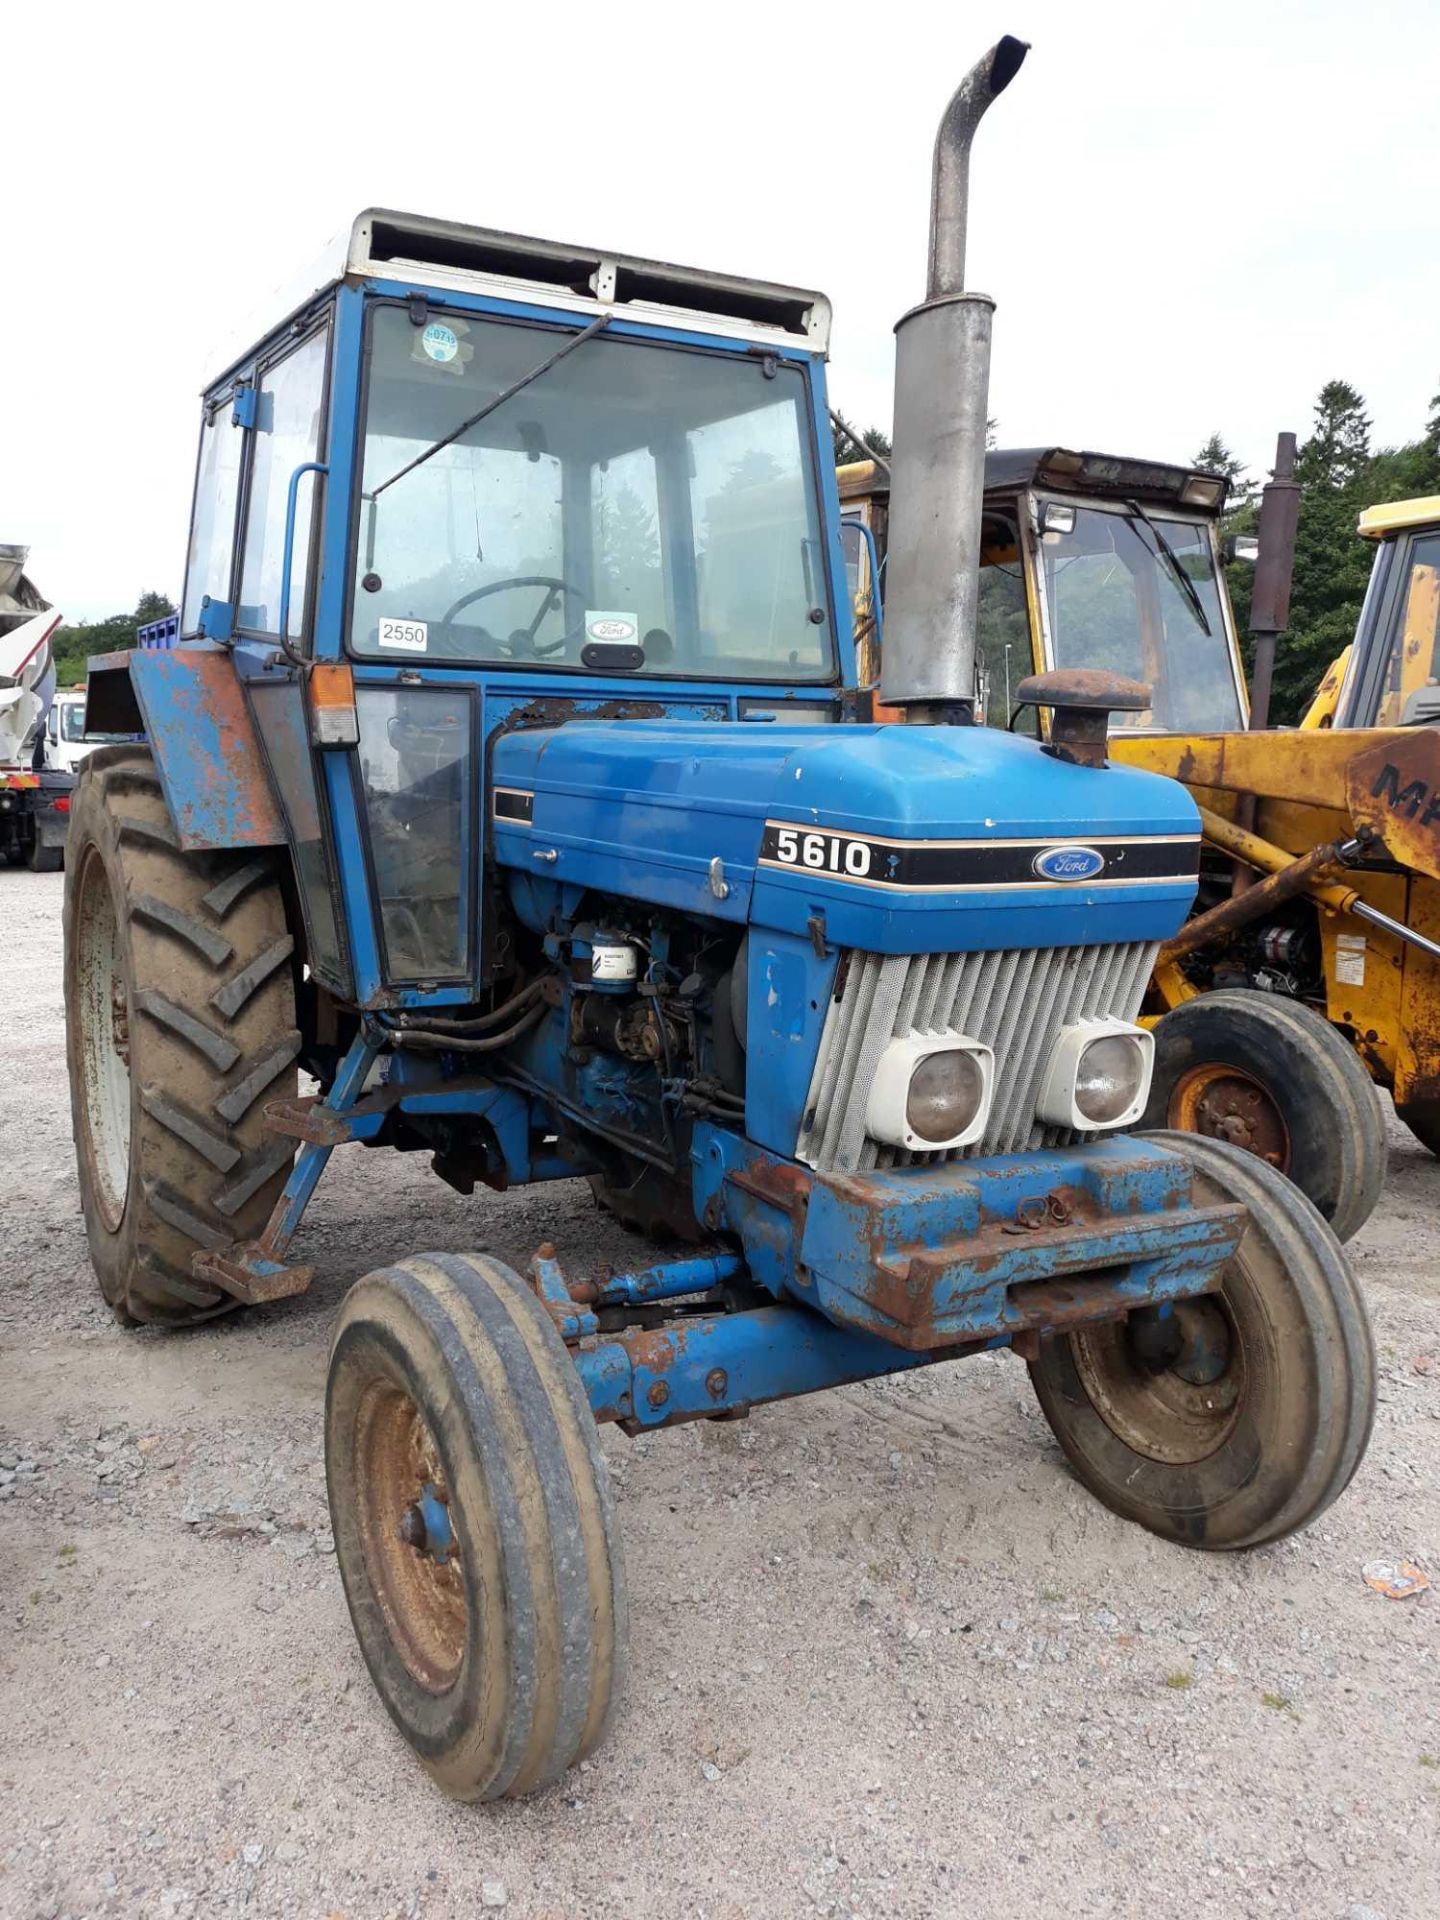 Ford New Holland 5610- 0cc Tractor - Image 2 of 2